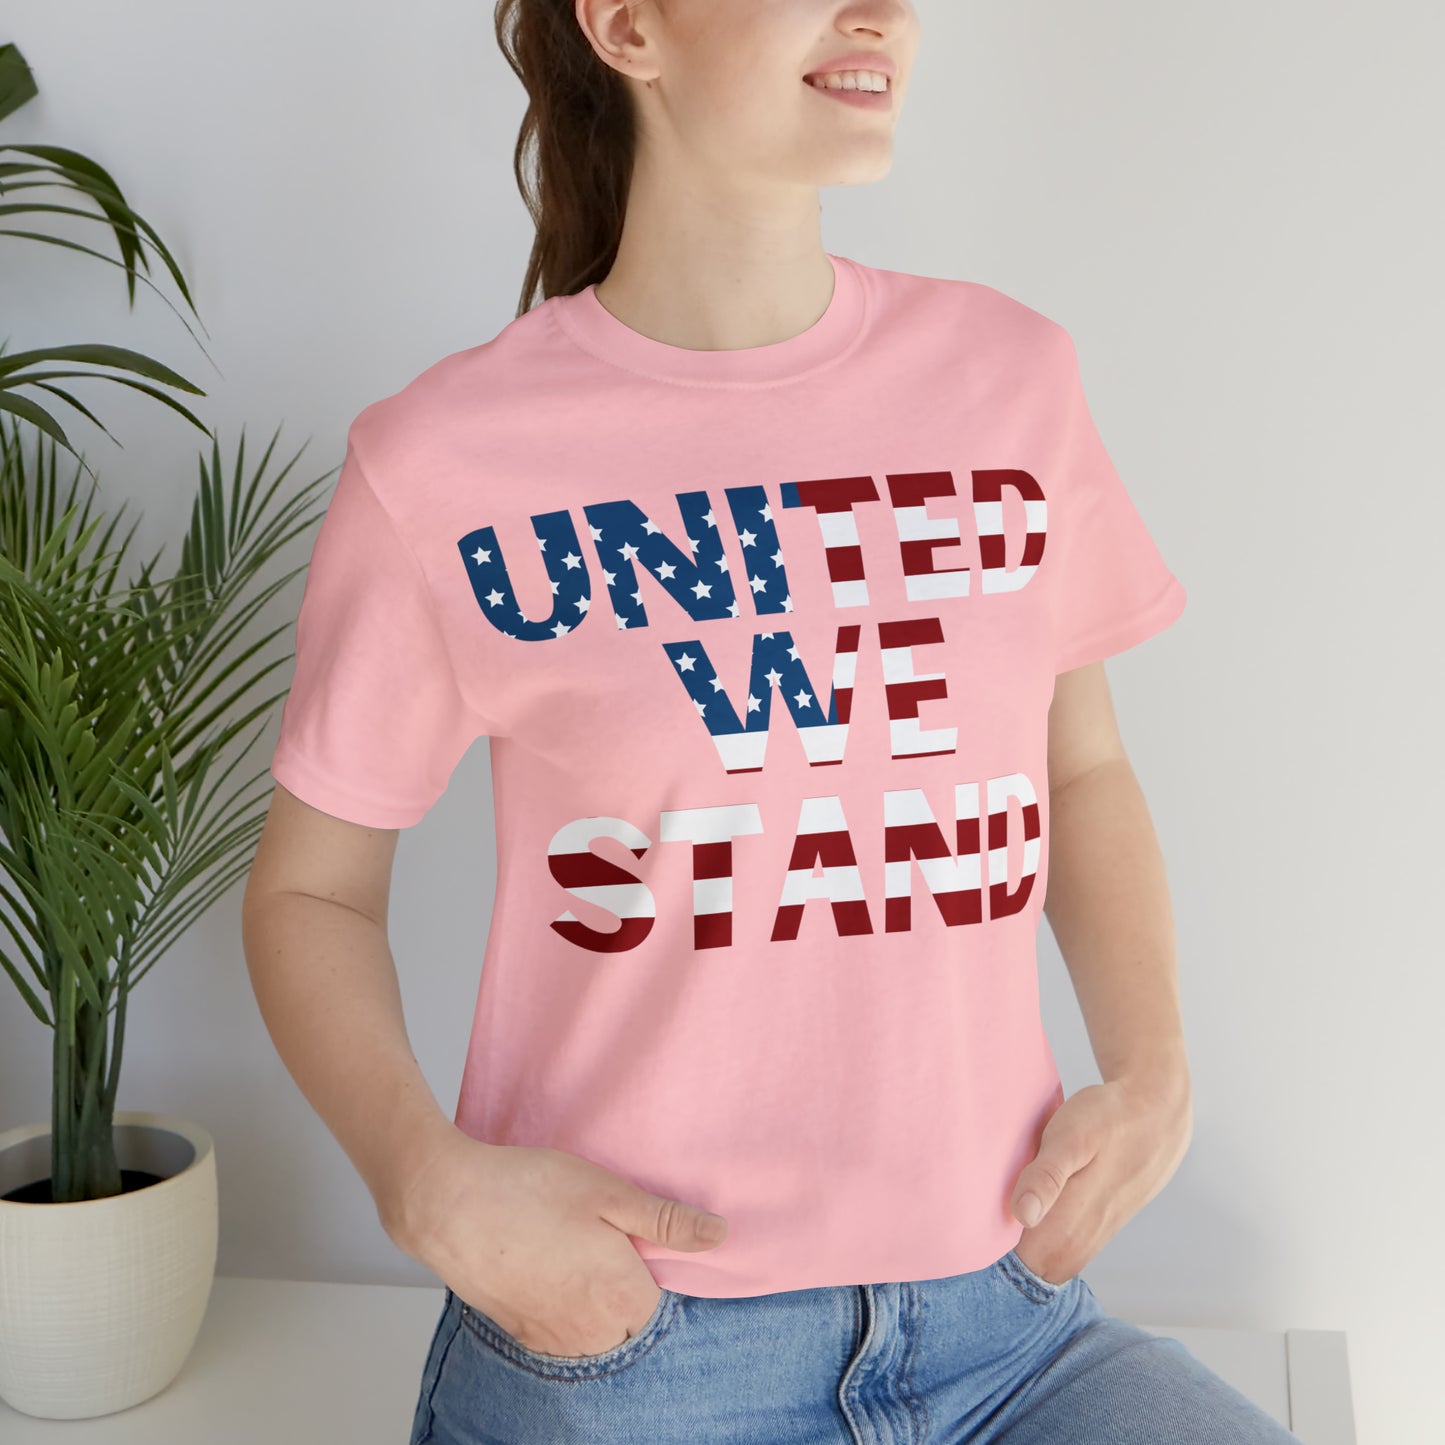 United We Stand shirt, USA Flag shirt, 4th of July shirt, Independence Day